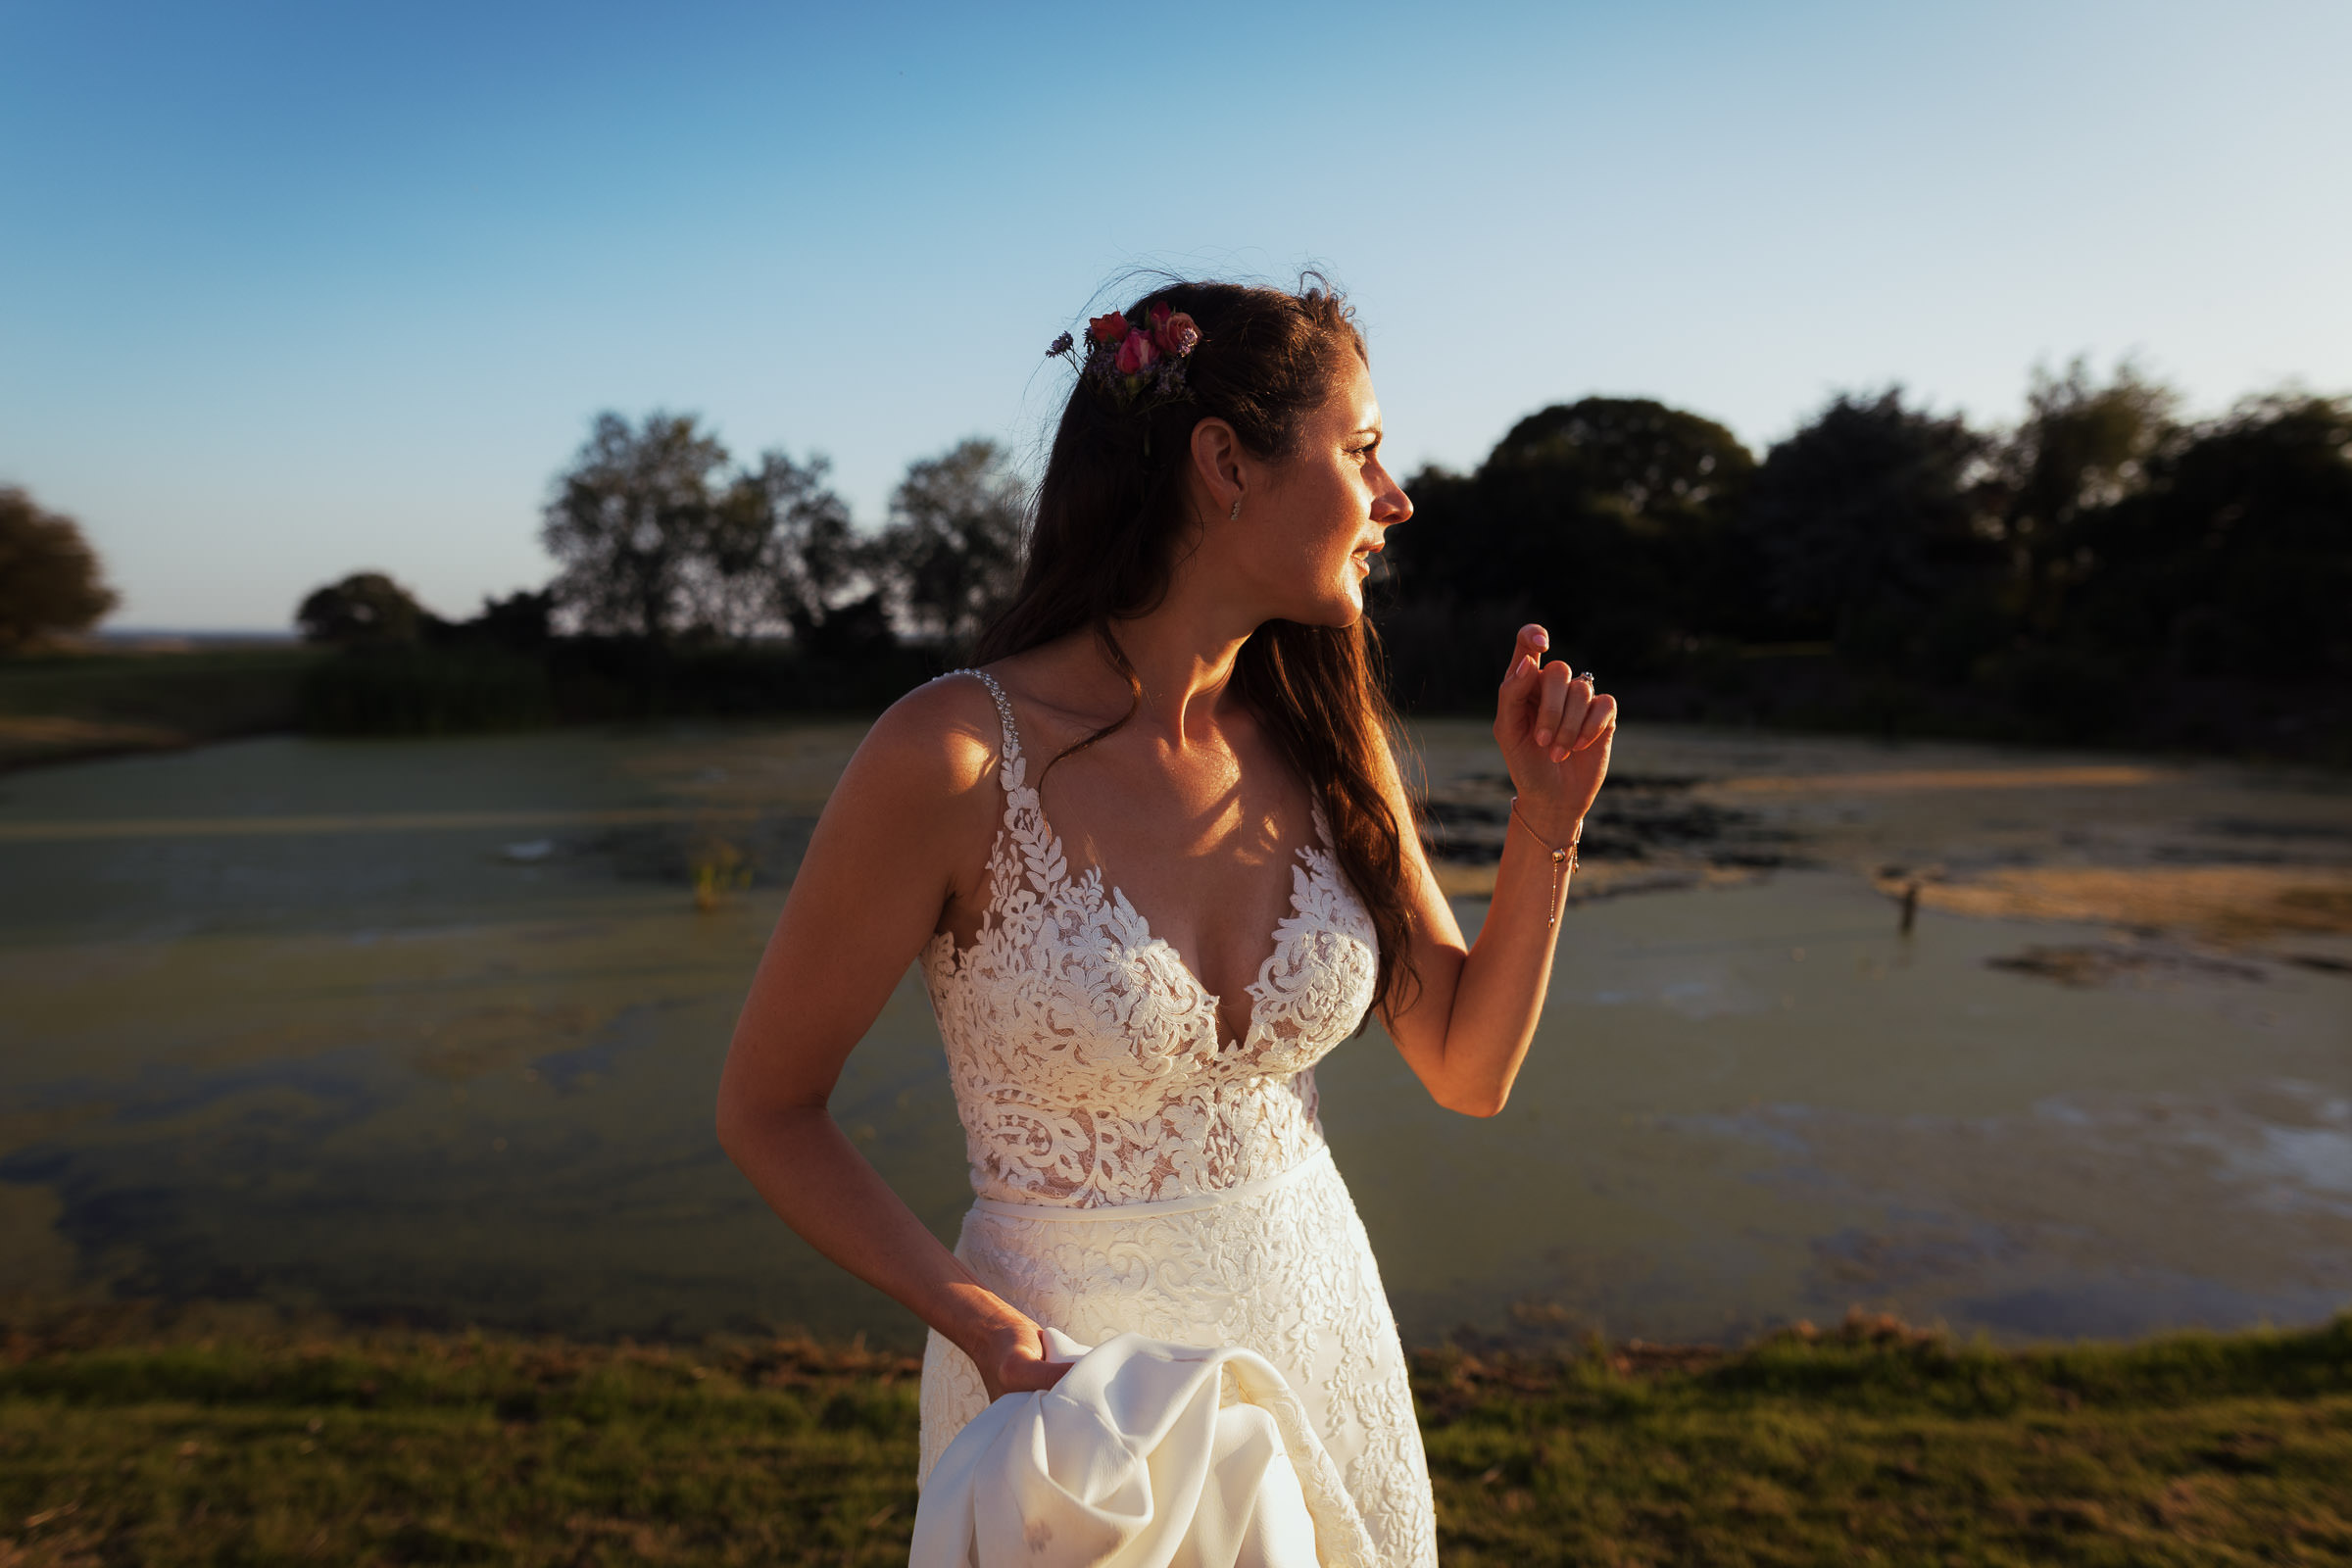 The bride in a lace wedding dress stood by a pond. The sun is setting so the light is low and casting shadows. The wedding is in Essex near South Woodham Ferrers. Candid wedding photographer from Essex. Bride is wearing Stella York 6648 from The Wedding Shop in Colchester.